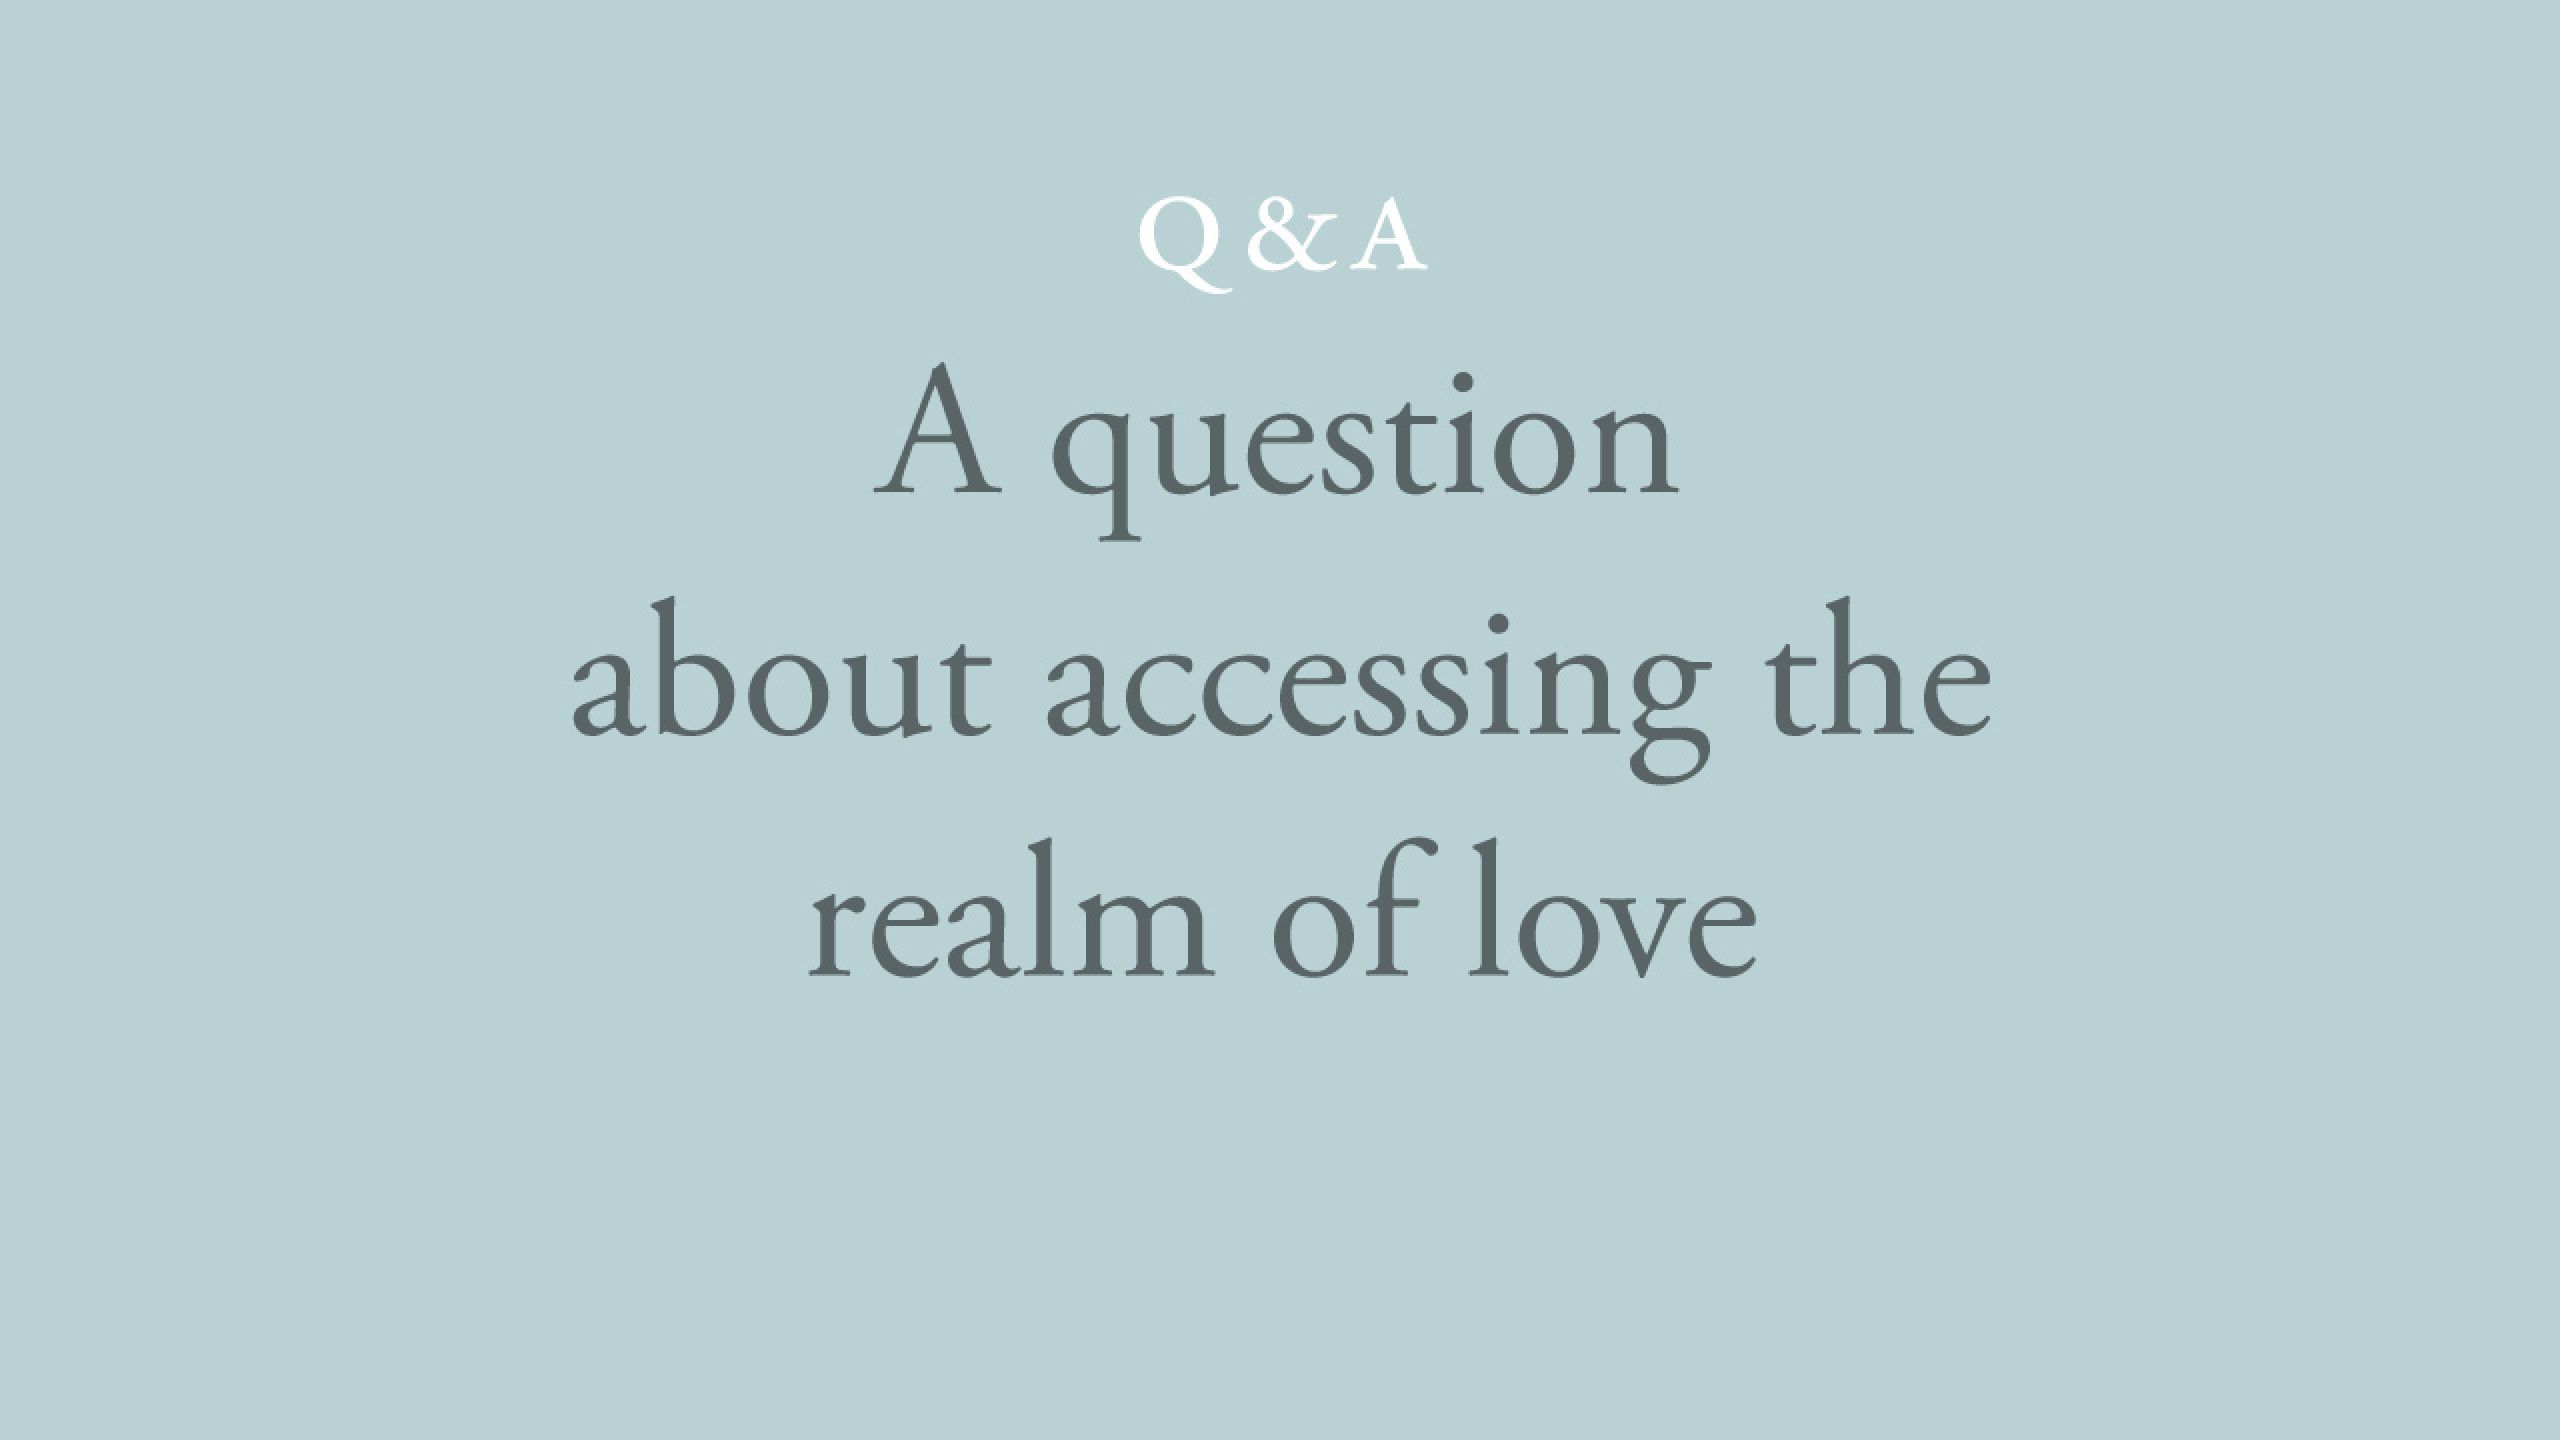 How can I access the realm in which one loves everyone and everything? 